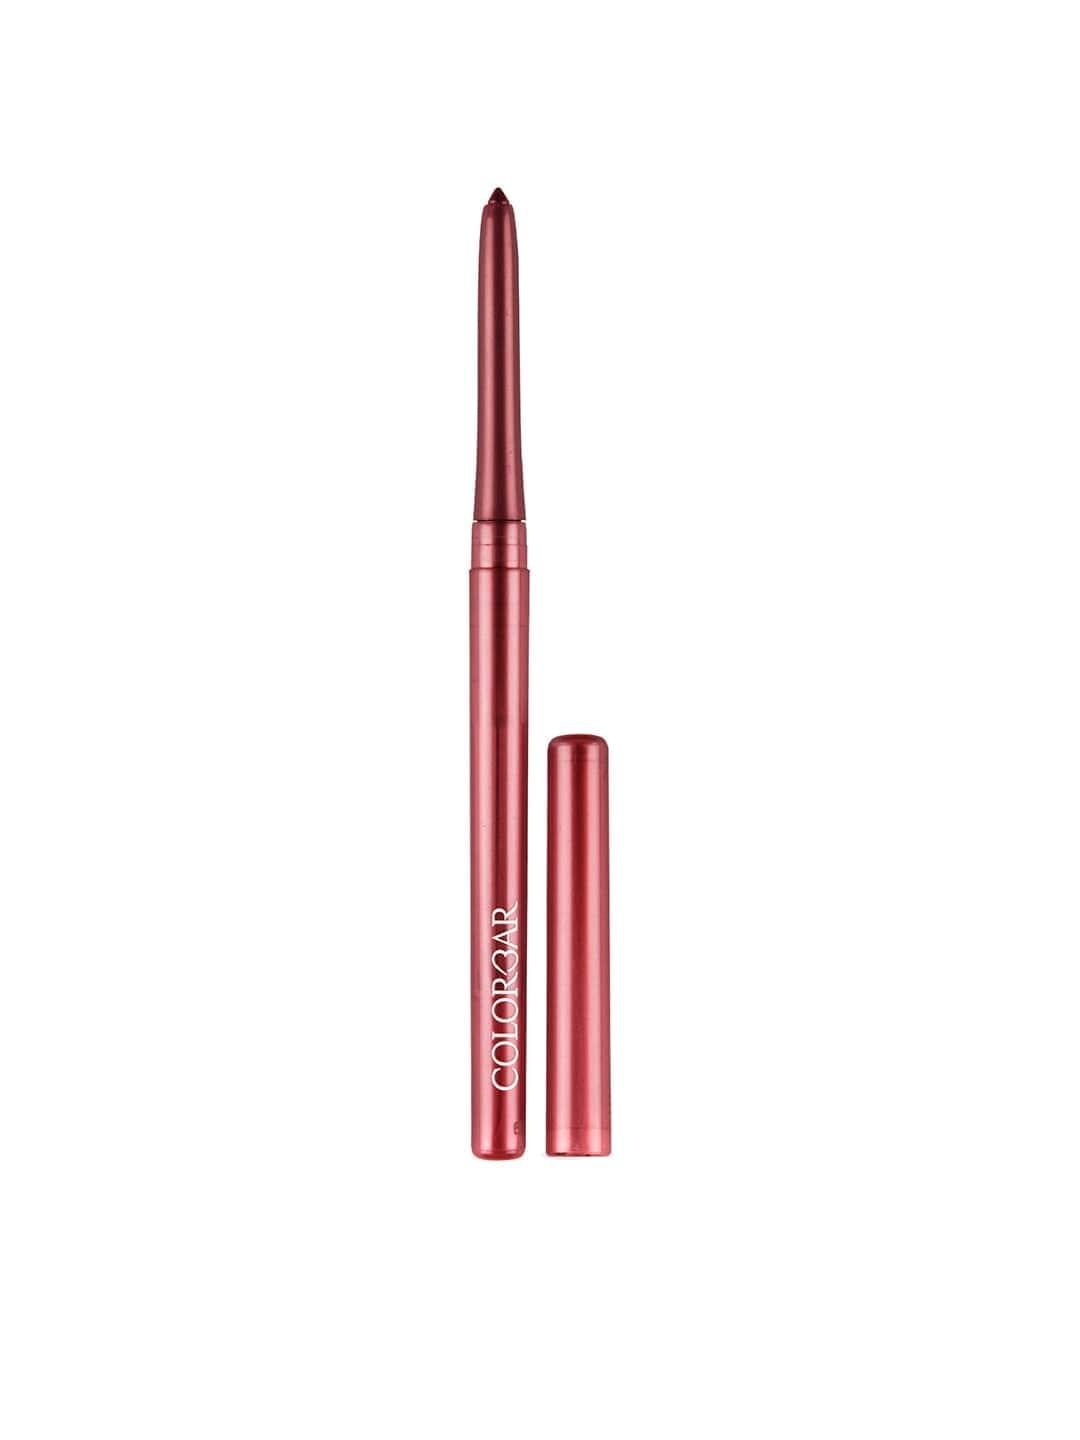 Colorbar All-Rounder Pencil - Rich Ruby 002 0.29g